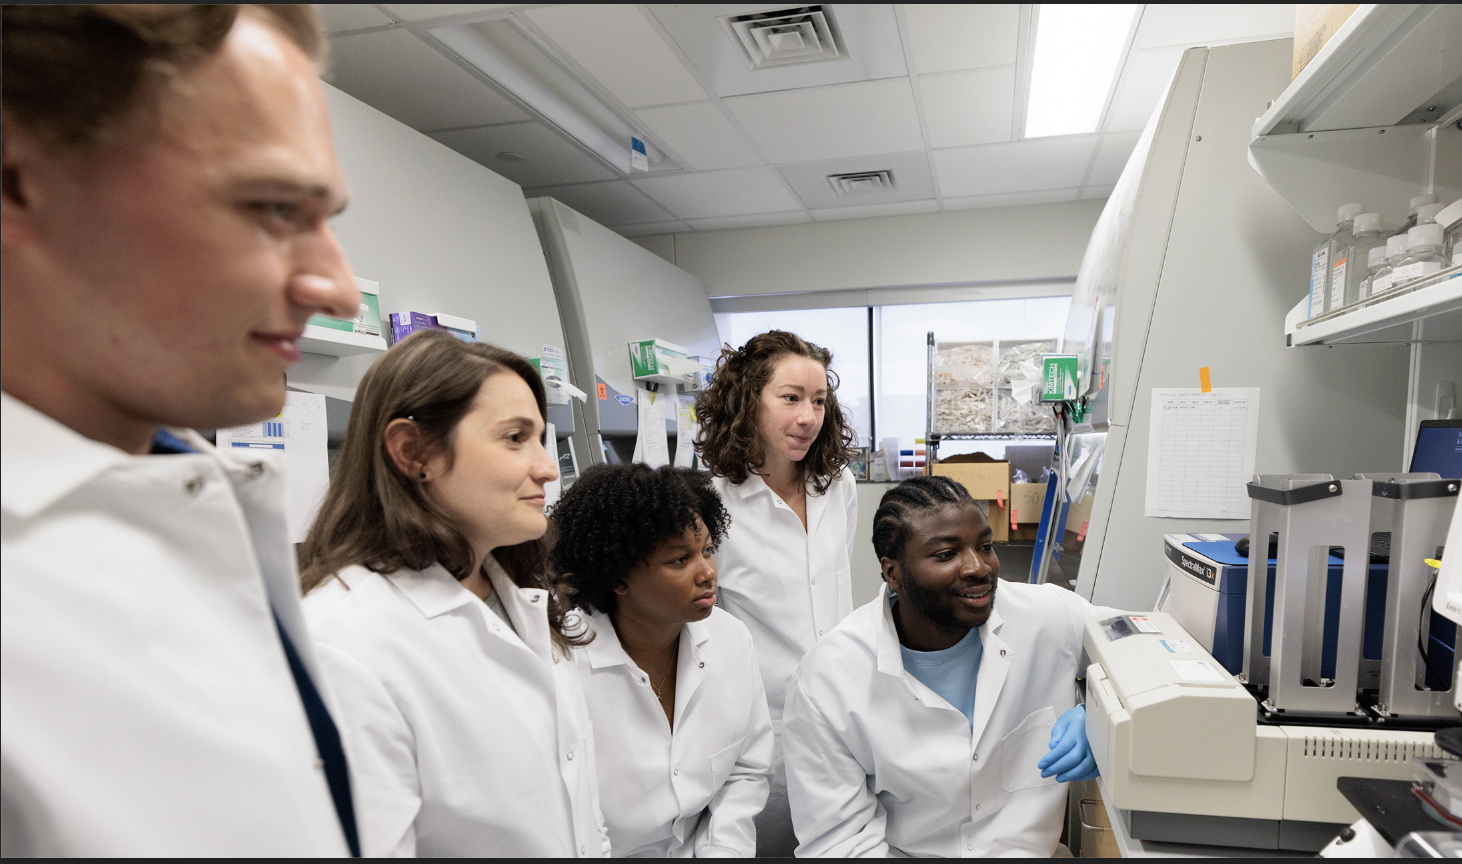 A group of racially diverse men and women working in a research lab